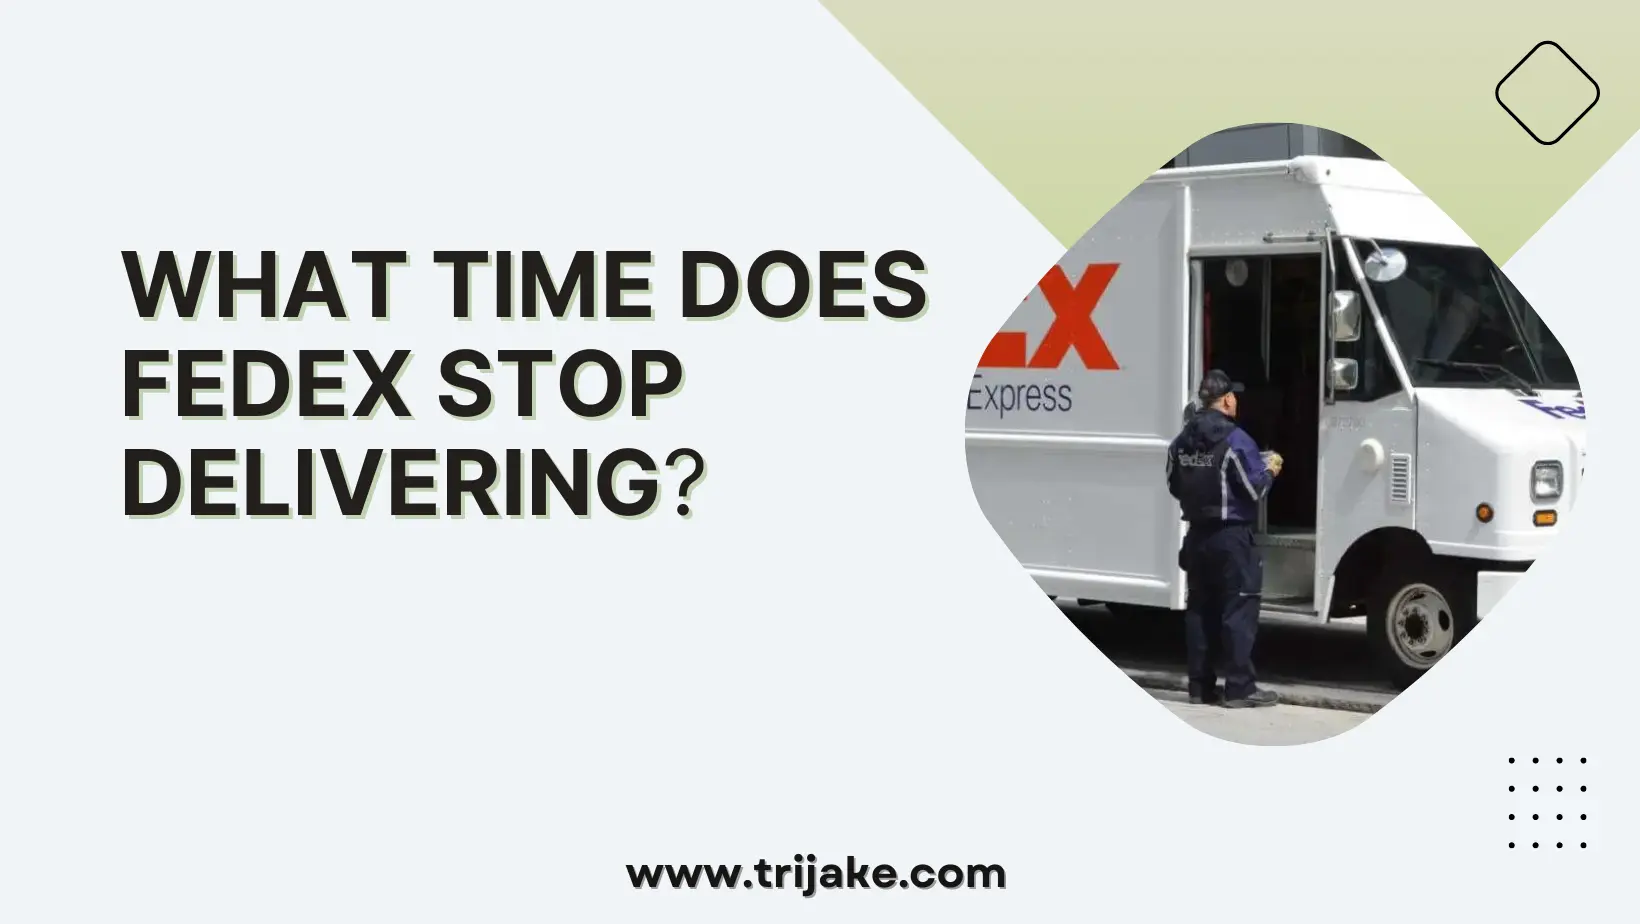 What Time Does Fedex Stop Delivering